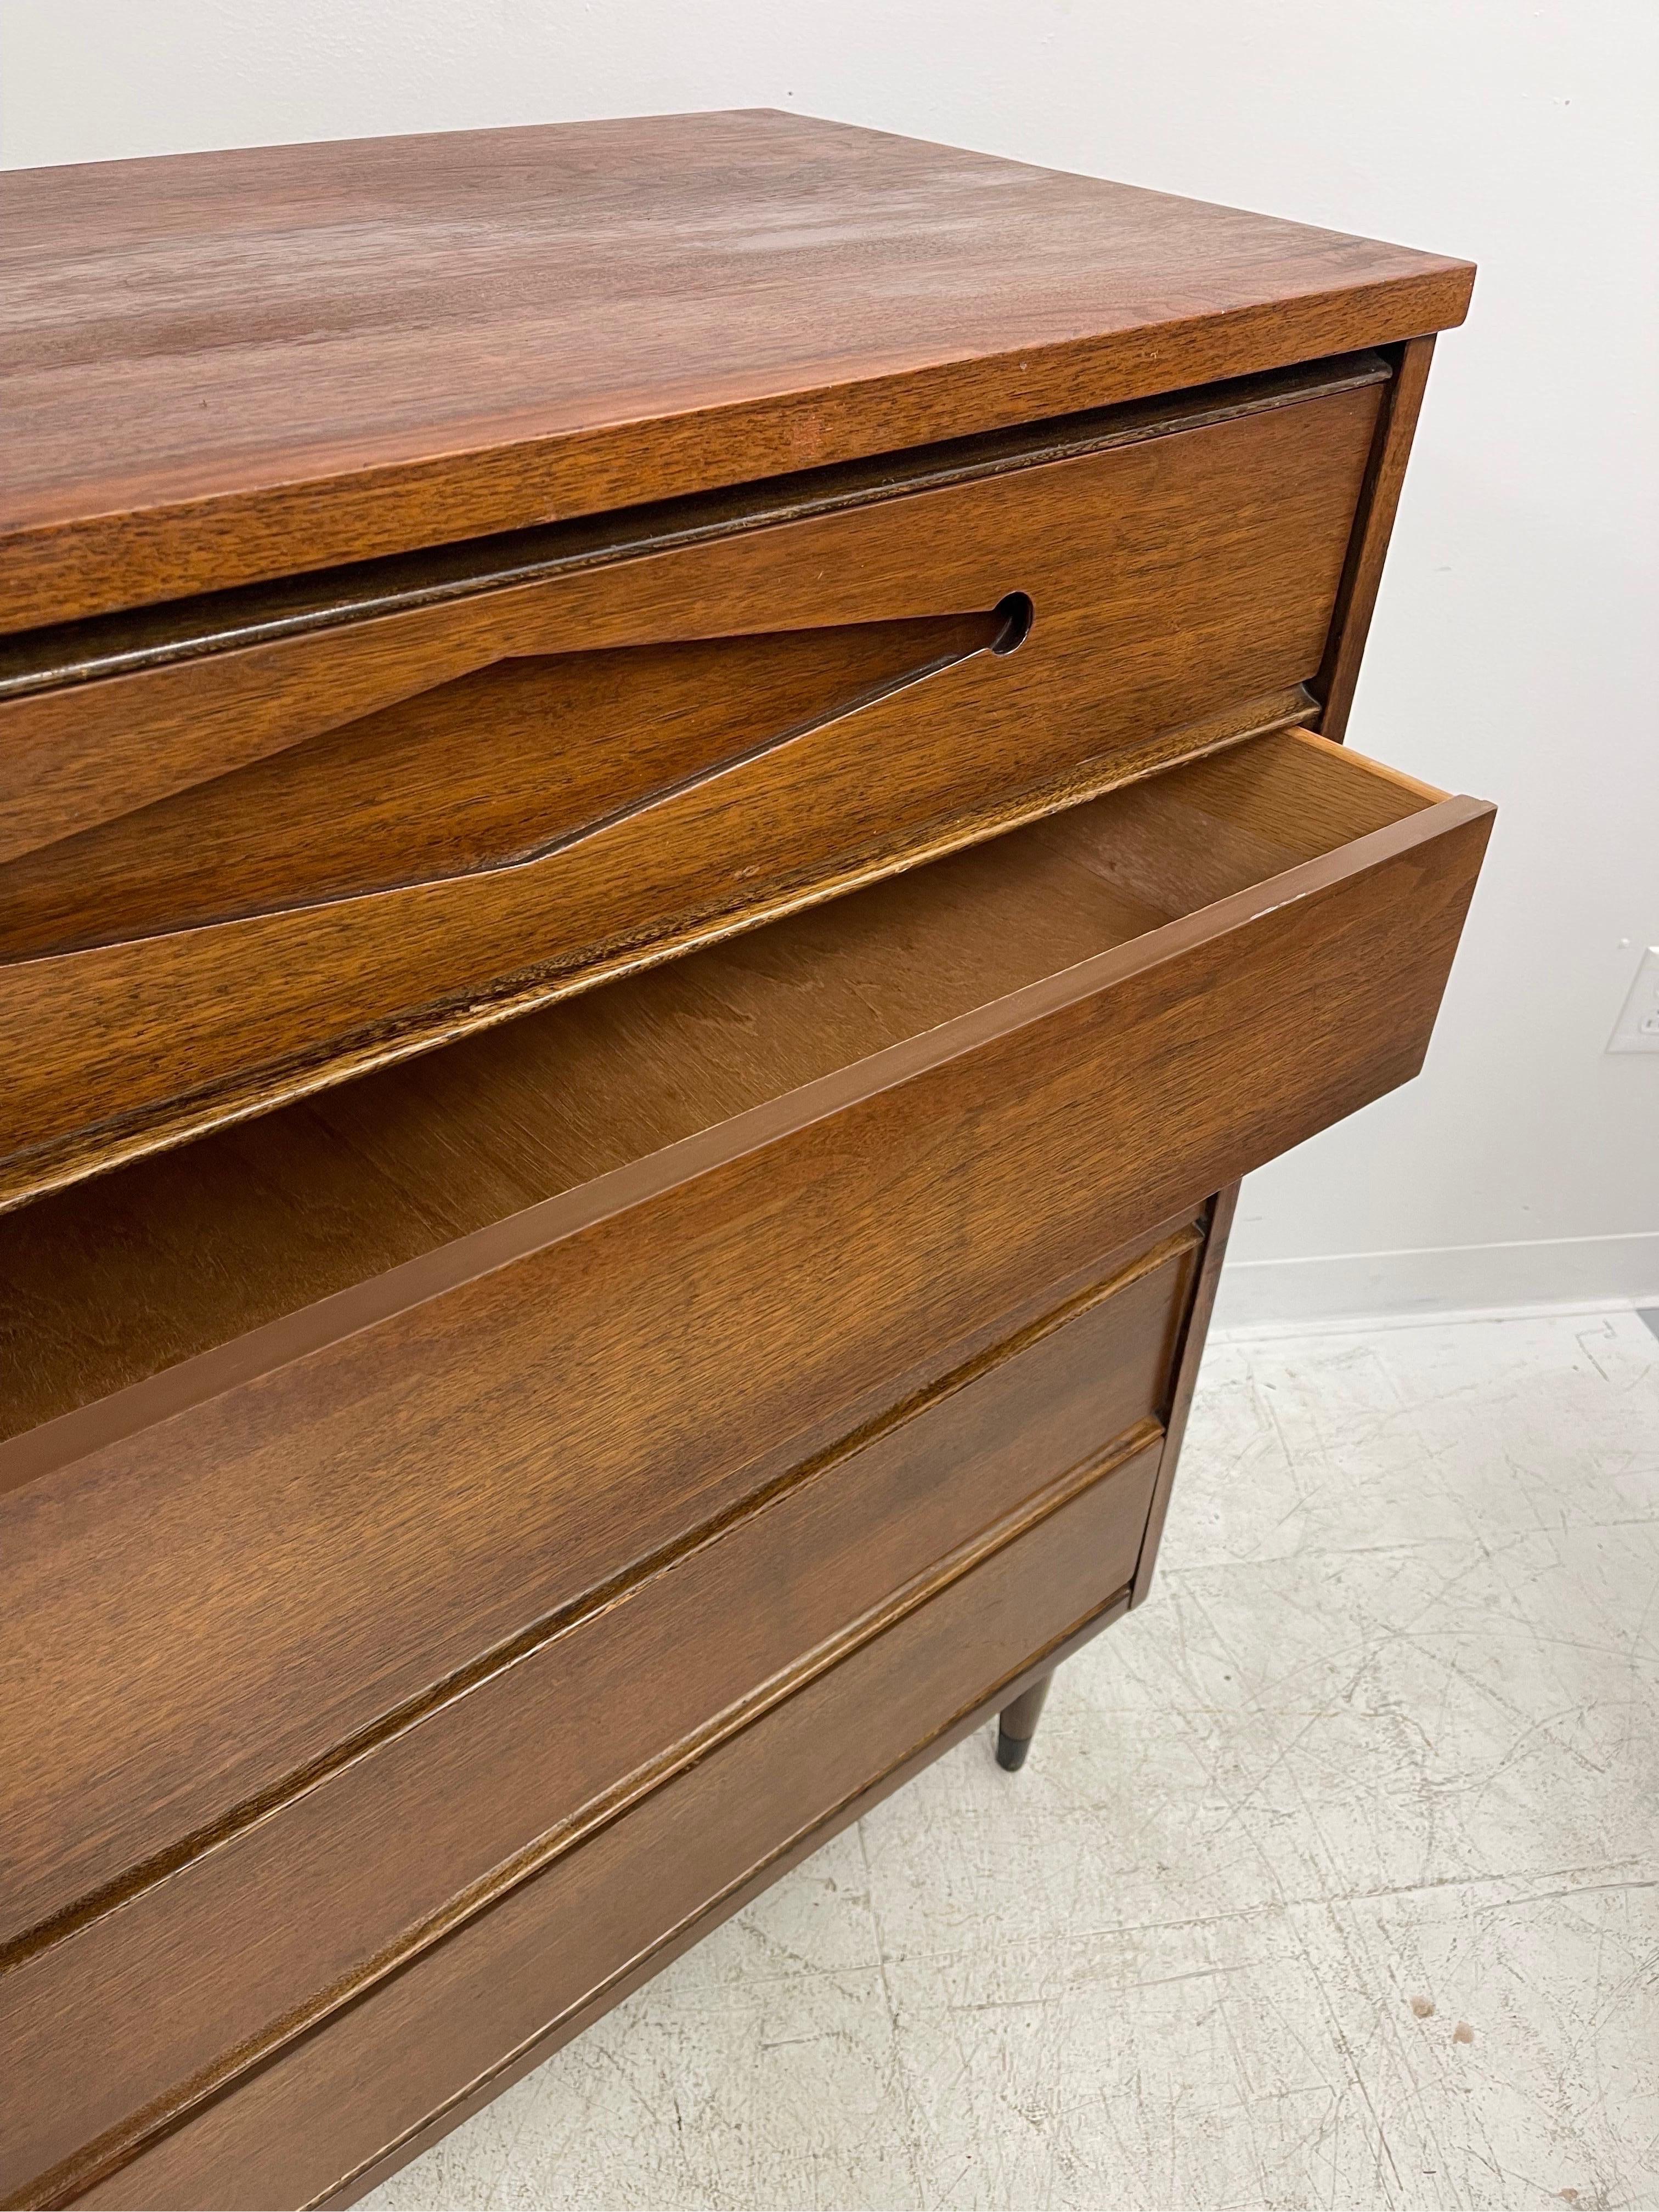 Vintage Mid-Century Modern Walnut Dresser Dovetail Drawers In Good Condition For Sale In Seattle, WA